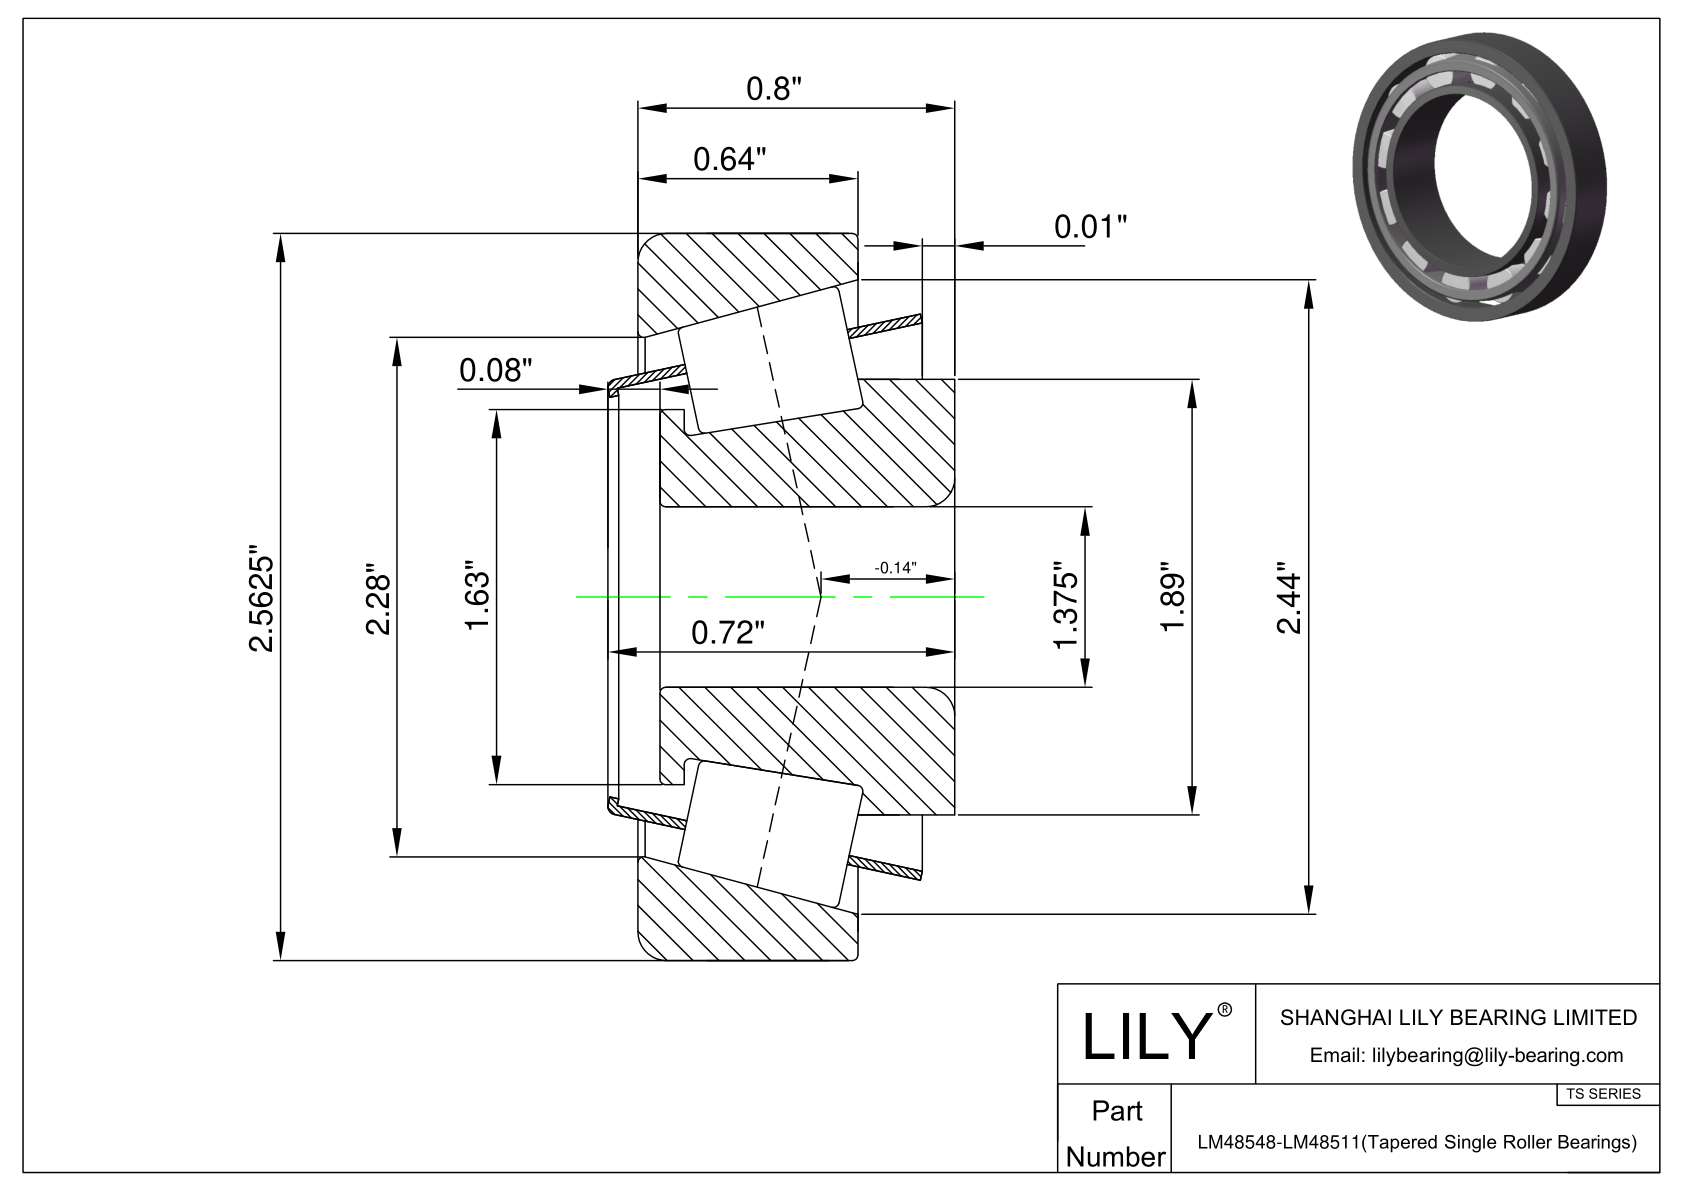 LM48548-LM48511 TS (Tapered Single Roller Bearings) (Imperial) cad drawing